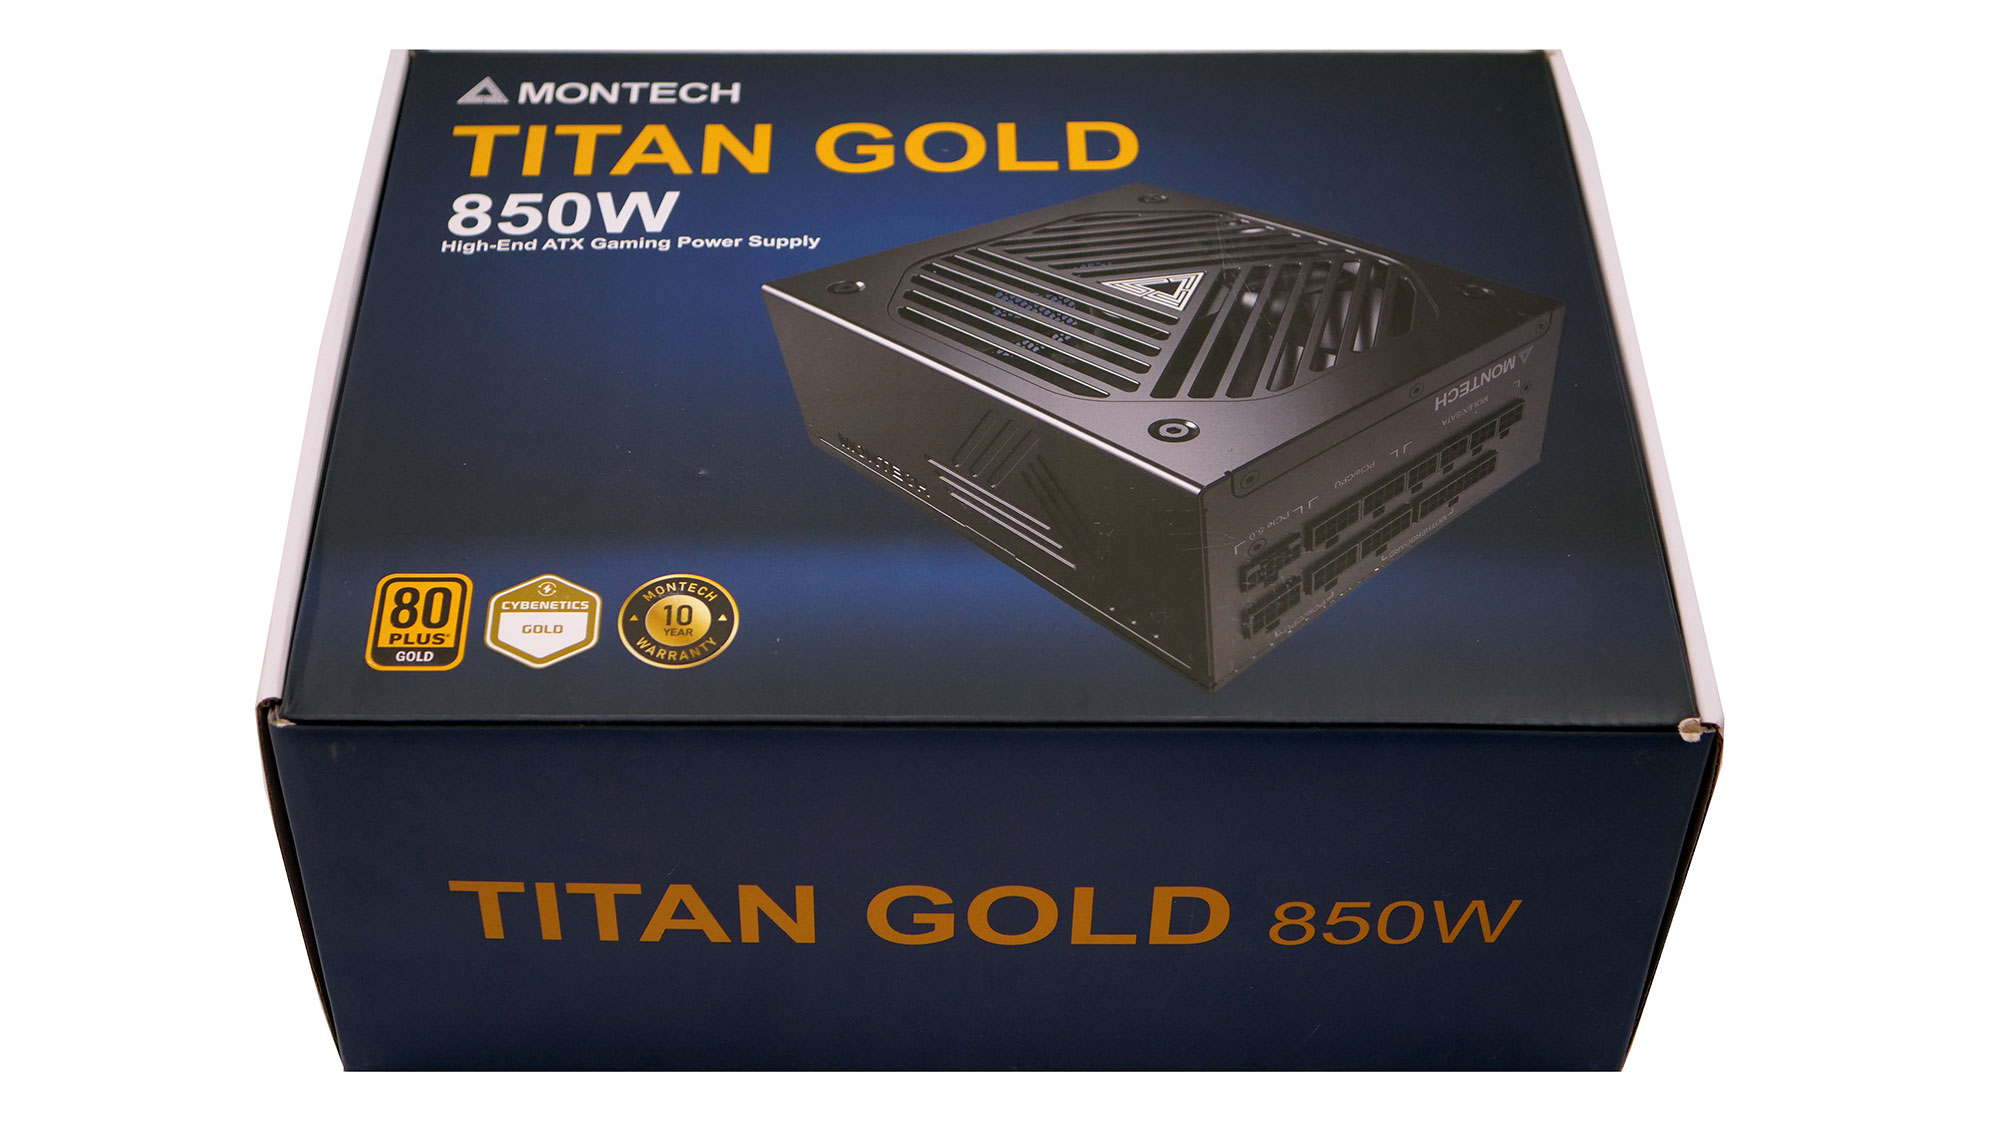 Seasonic VERTEX GX-850, 850W 80+ Gold, ATX 3.0 / PCIe 5.0 Compliant Full  Modular, Fan Control in Fanless, Silent, and Cooling Mode, for Gaming and